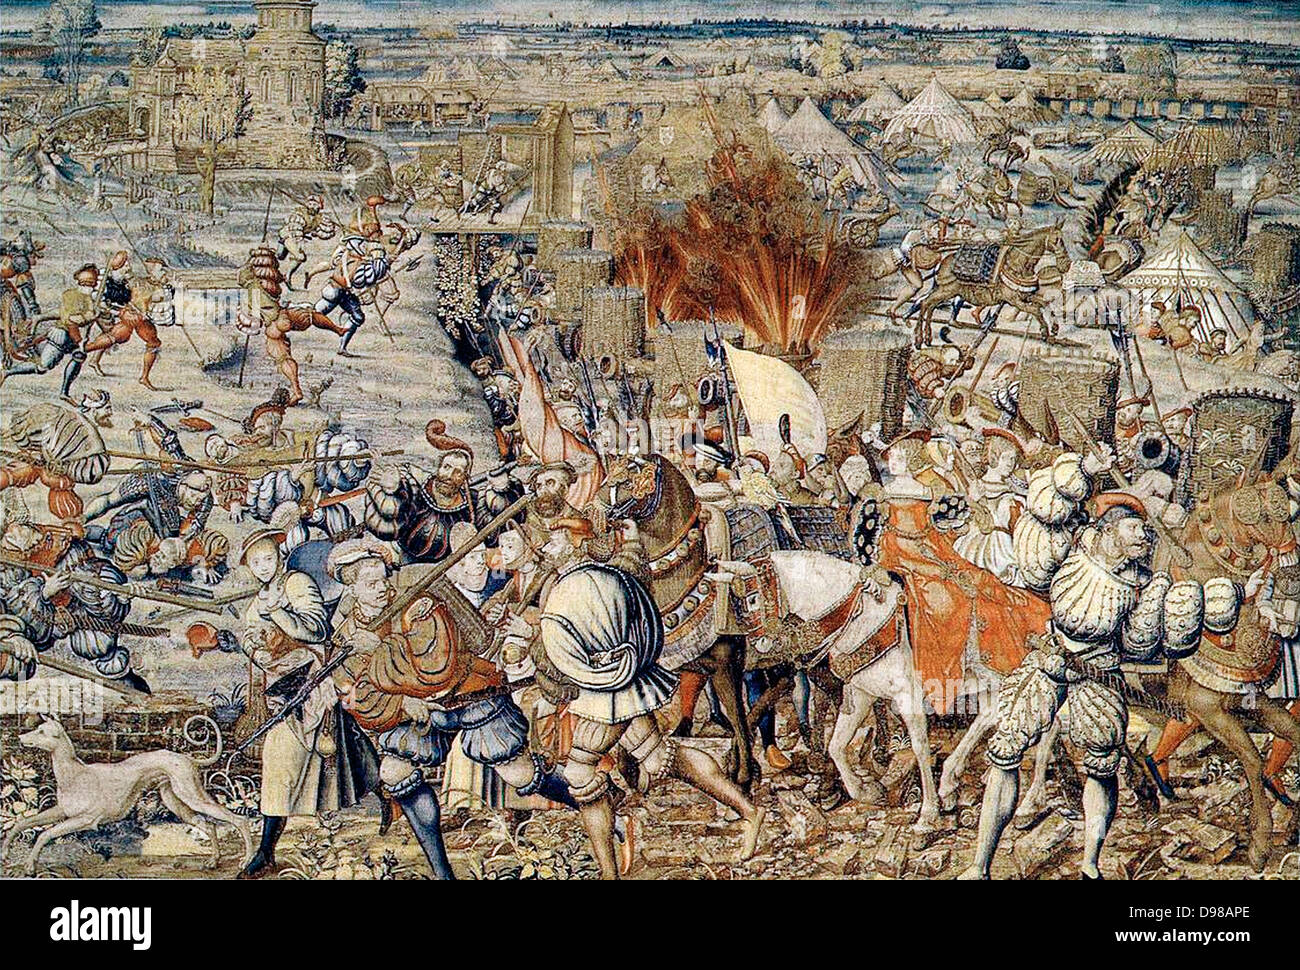 The Battle of Pavia, February 24, 1525, was the decisive engagement of the Italian War of 1521-25. A Spanish-Imperial army under the command of Charles de Lannoy attacked the French army under the personal command of Francis I of France. The French army was defeated. Francis himself, captured by the Spanish troops, was imprisoned by Charles V and forced to sign the humiliating Treaty of Madrid, surrendering significant territory to his captor. Stock Photo